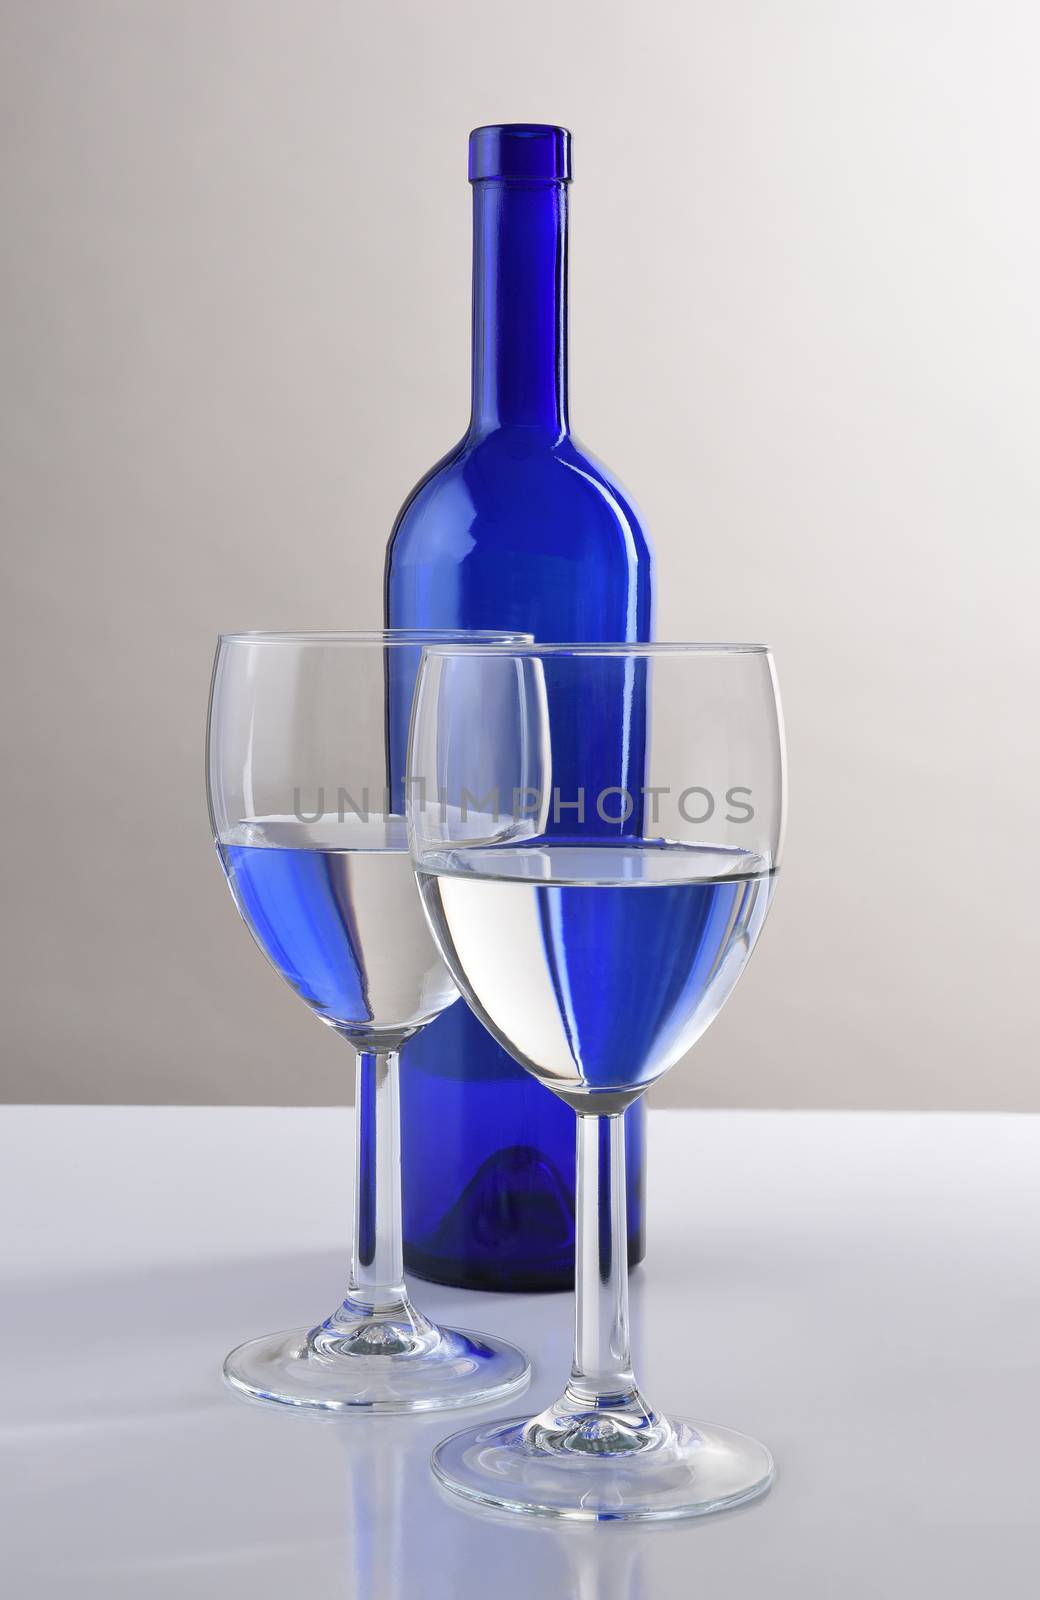 A blue wine bottle behind two half filled glasses with the bottles reflection.